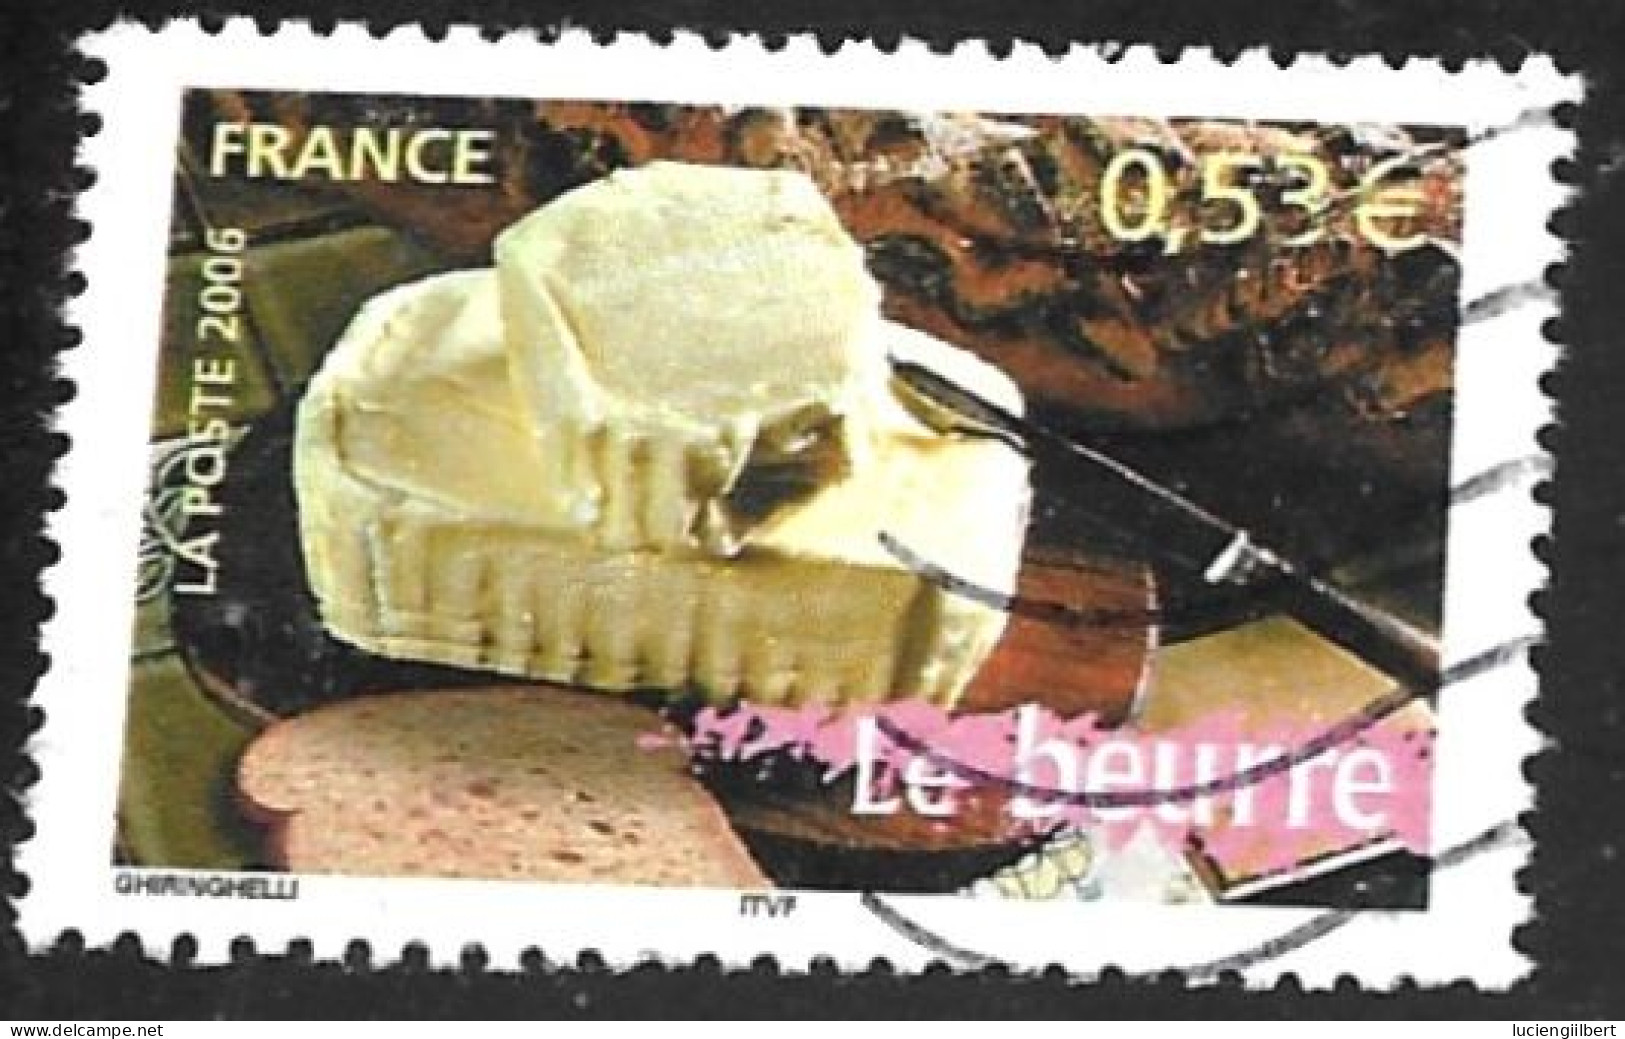 TIMBRE N° 3884   -   LE BEURRE -  OBLITERE  -  2006 - Used Stamps